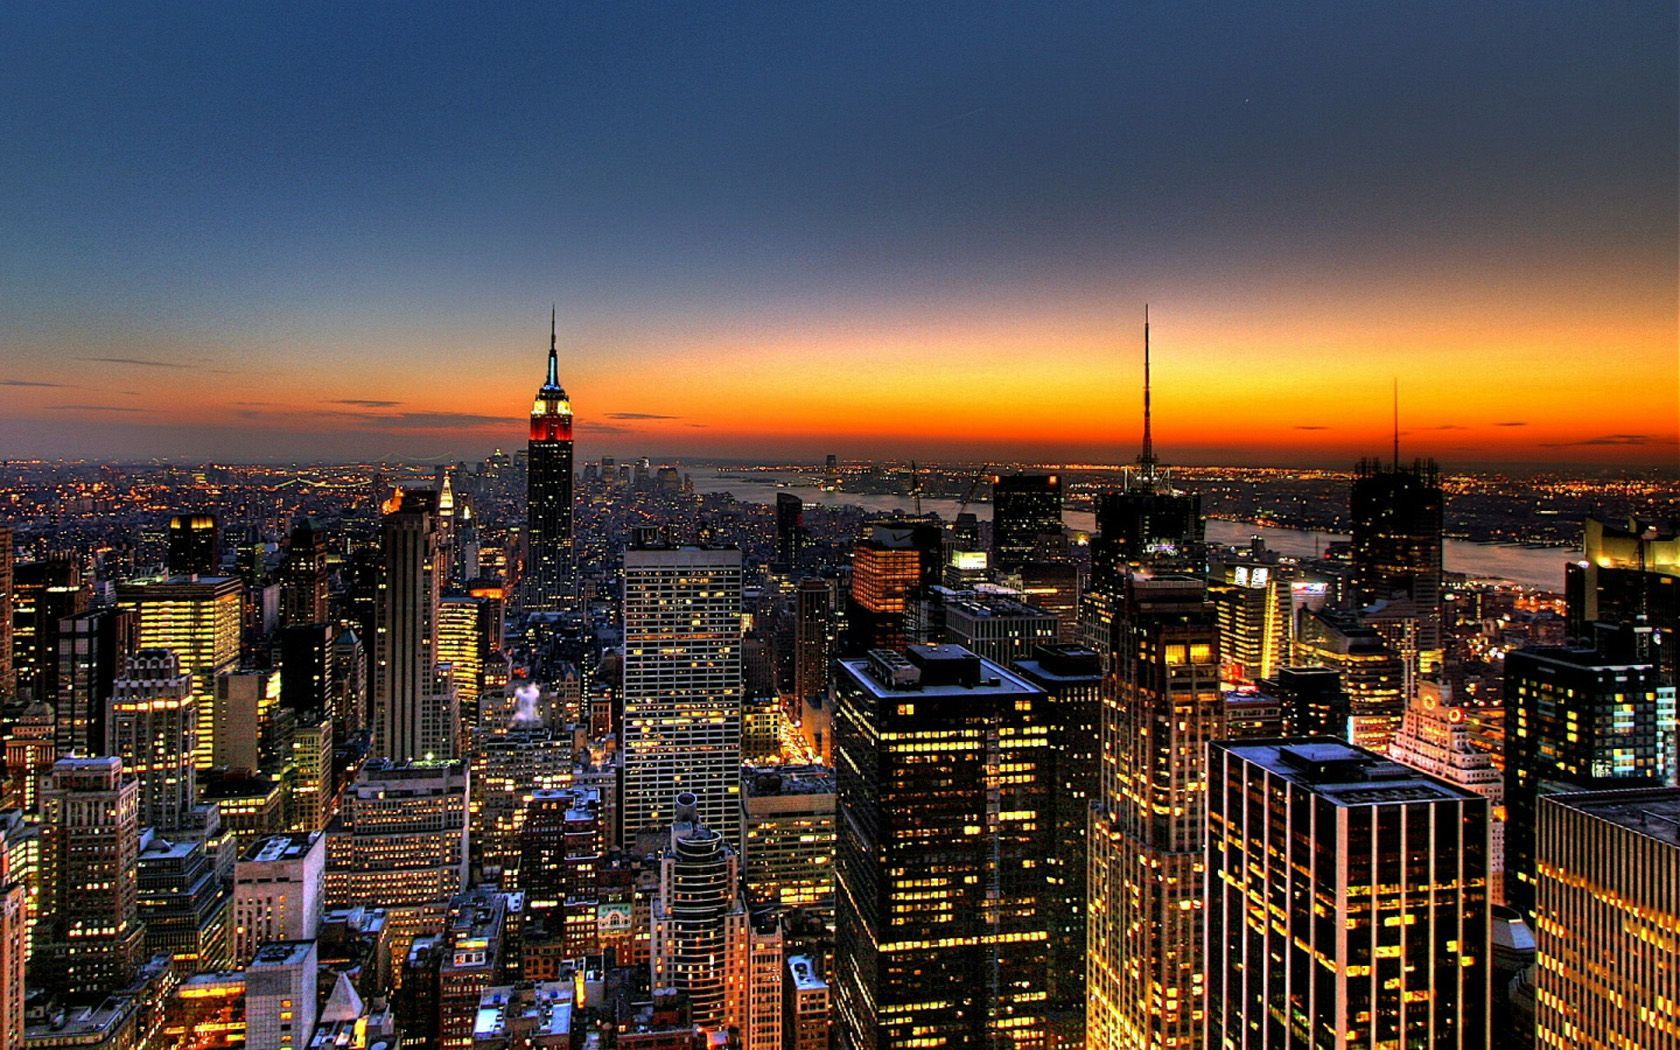 New York City Lights For PC id: 1931 - 7HDWallpapers